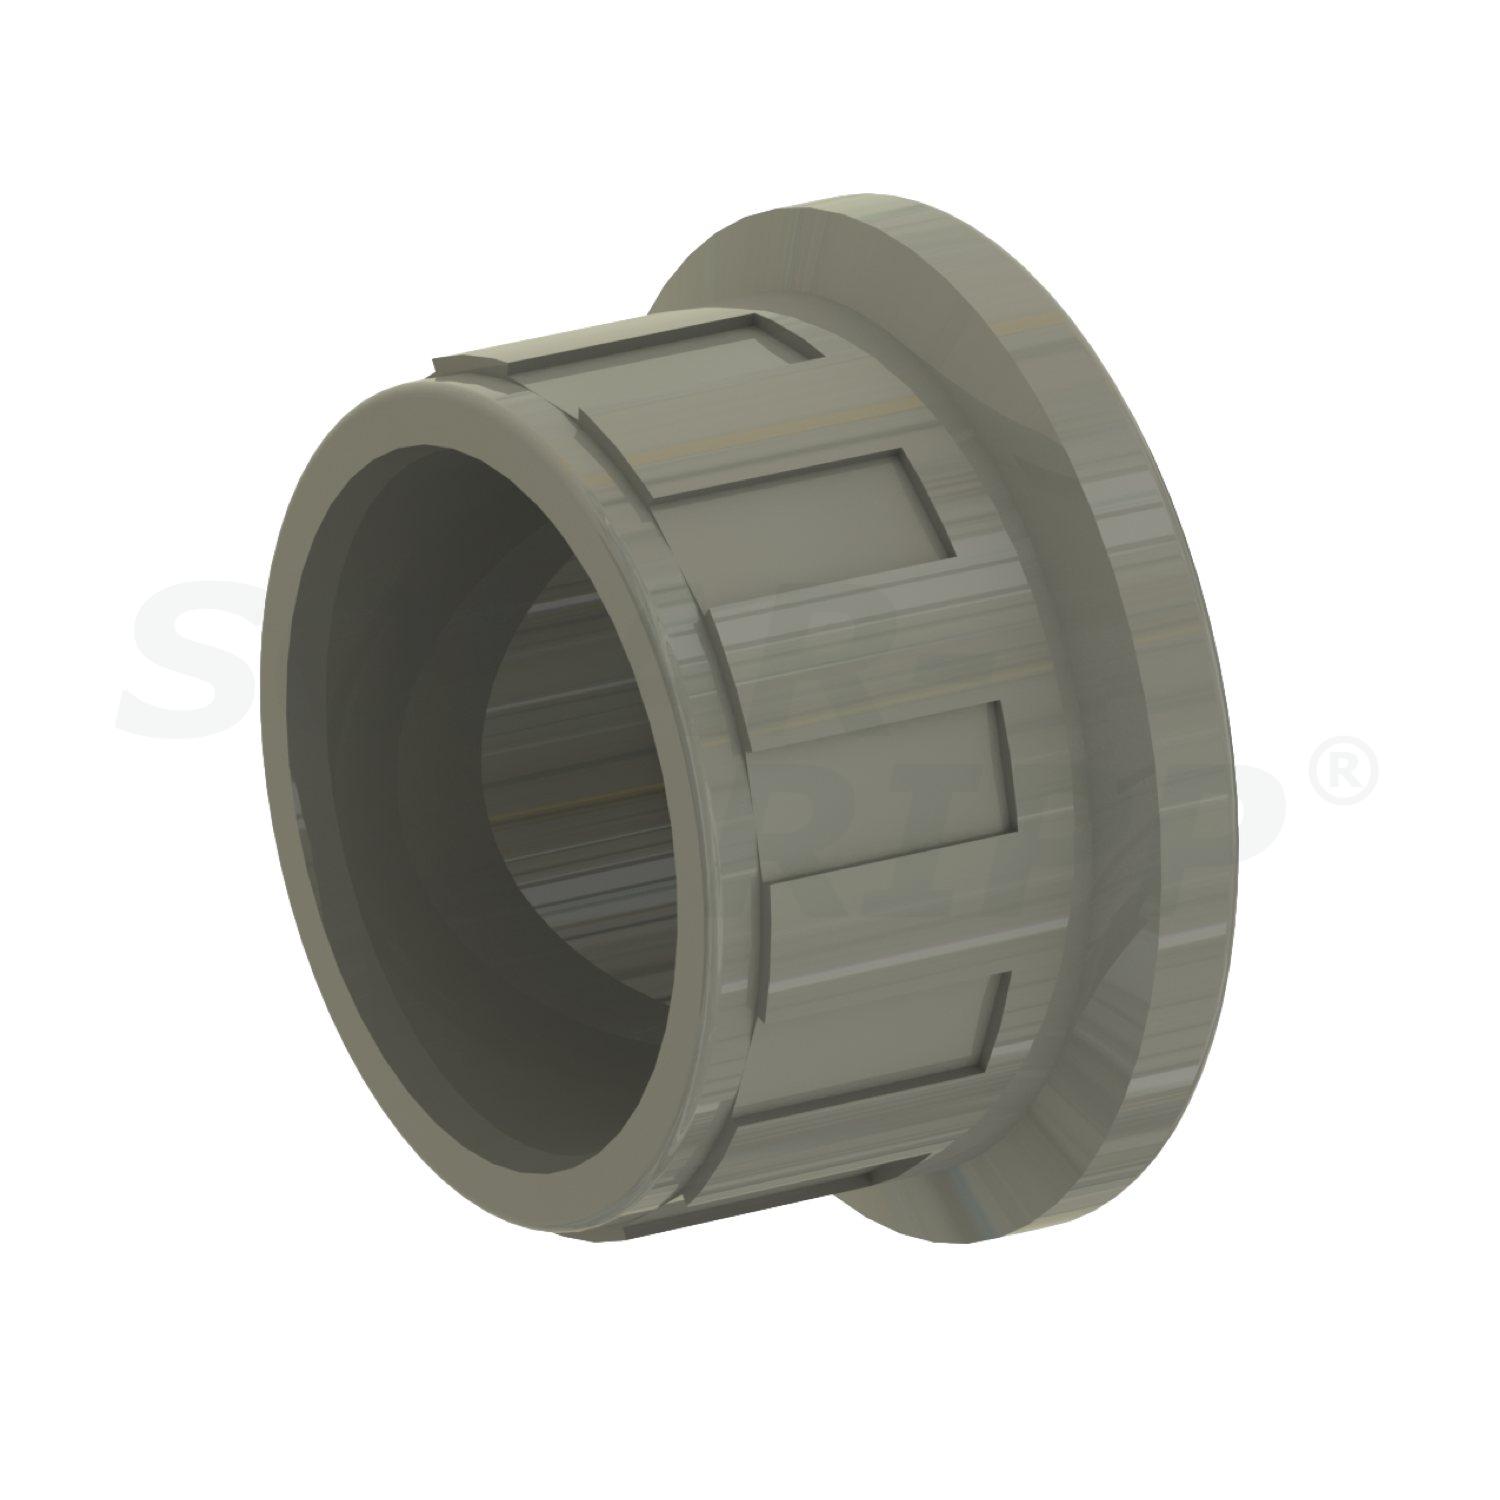 PVC insert for actuated valve 63mm